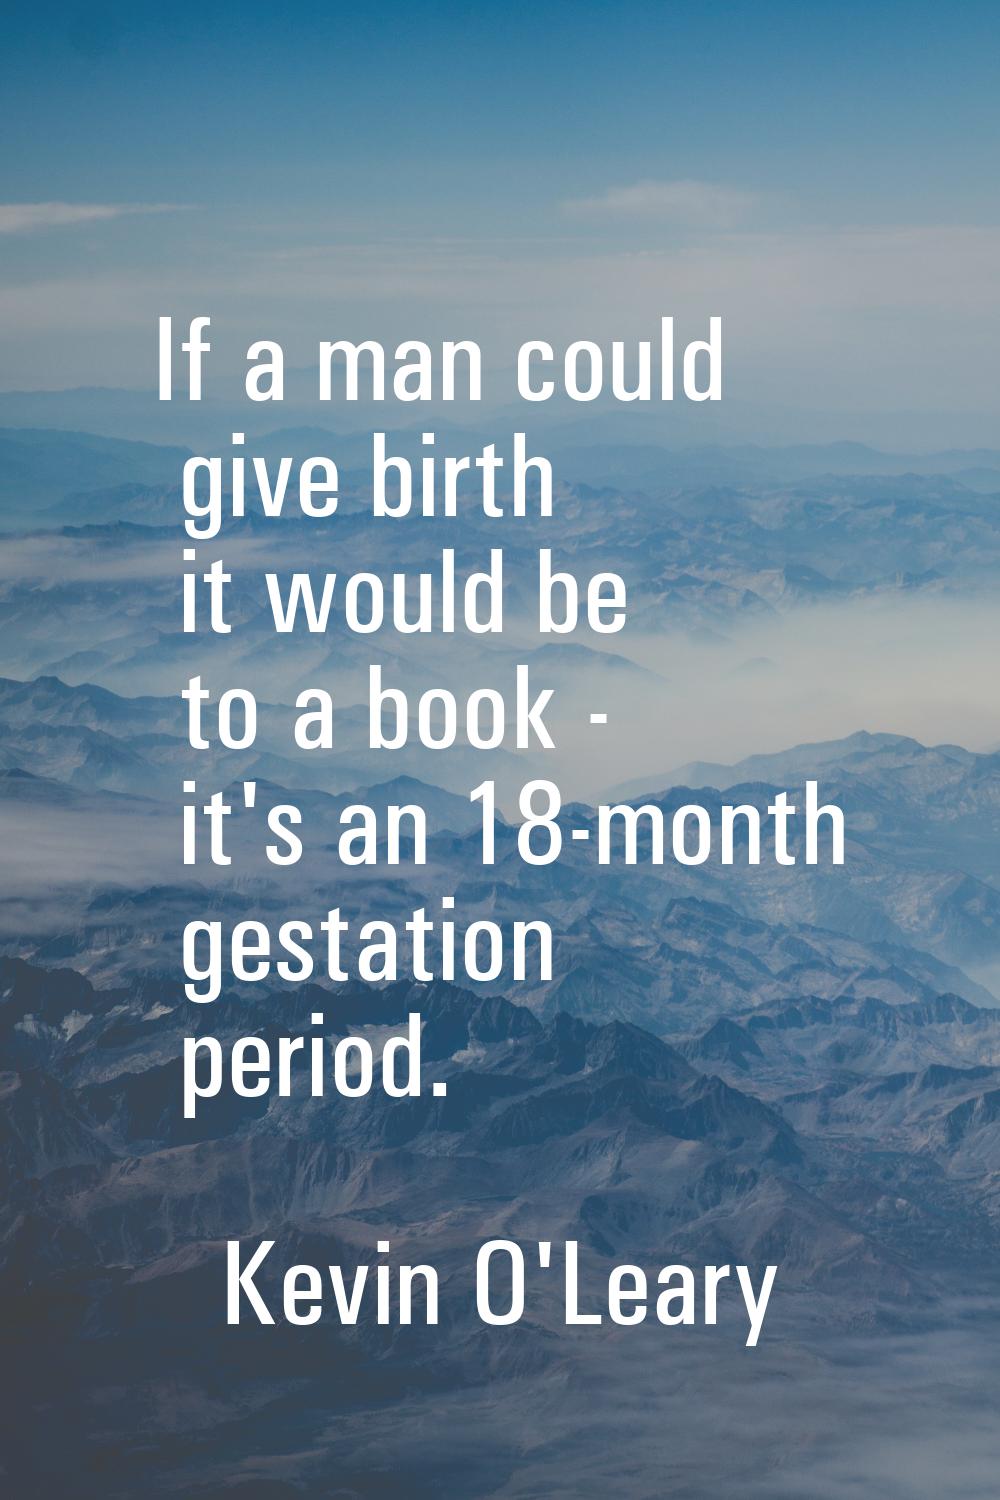 If a man could give birth it would be to a book - it's an 18-month gestation period.